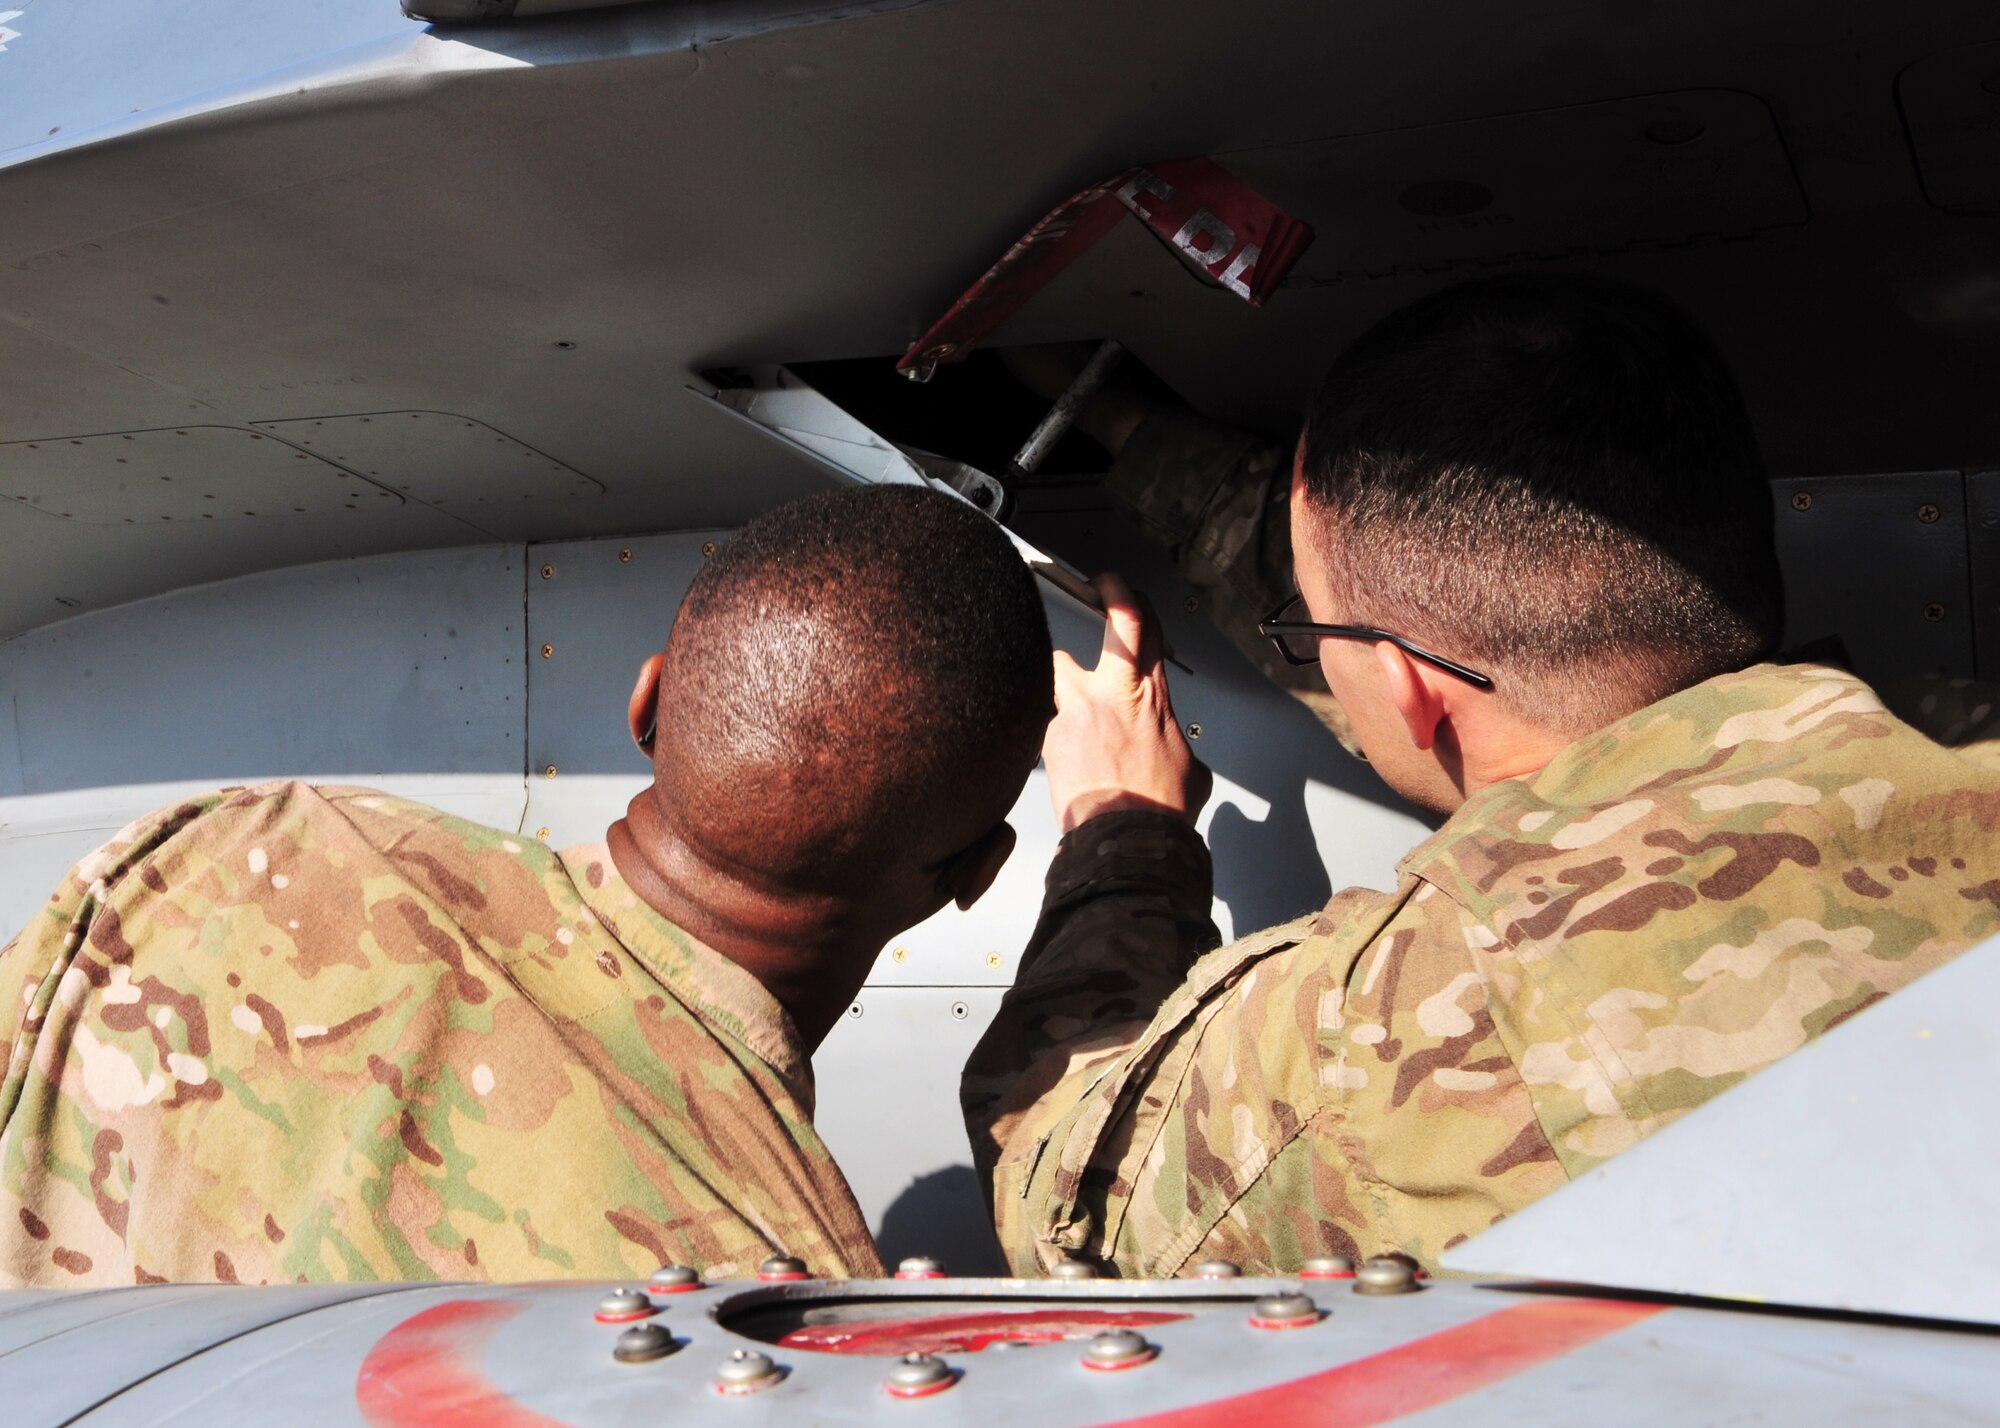 U.S. Air Force Senior Airman Andrew Freire, 455th Expeditionary Aircraft Maintenance Squadron weapons troop, familiarizes U.S. Army Command Sgt. Maj. Christopher Gilpin, Combined Joint Task Force 3 United States Forces Afghanistan, with an aircraft during a tour Jan. 6, 2015 at Bagram Airfield, Afghanistan. During the tour, Gilpin had the opportunity to meet with 455th Air Expeditionary Wing leadership and become better acquainted with Air Force assets and squadrons. (U.S. Air Force photo by Staff Sgt. Whitney Amstutz/released)